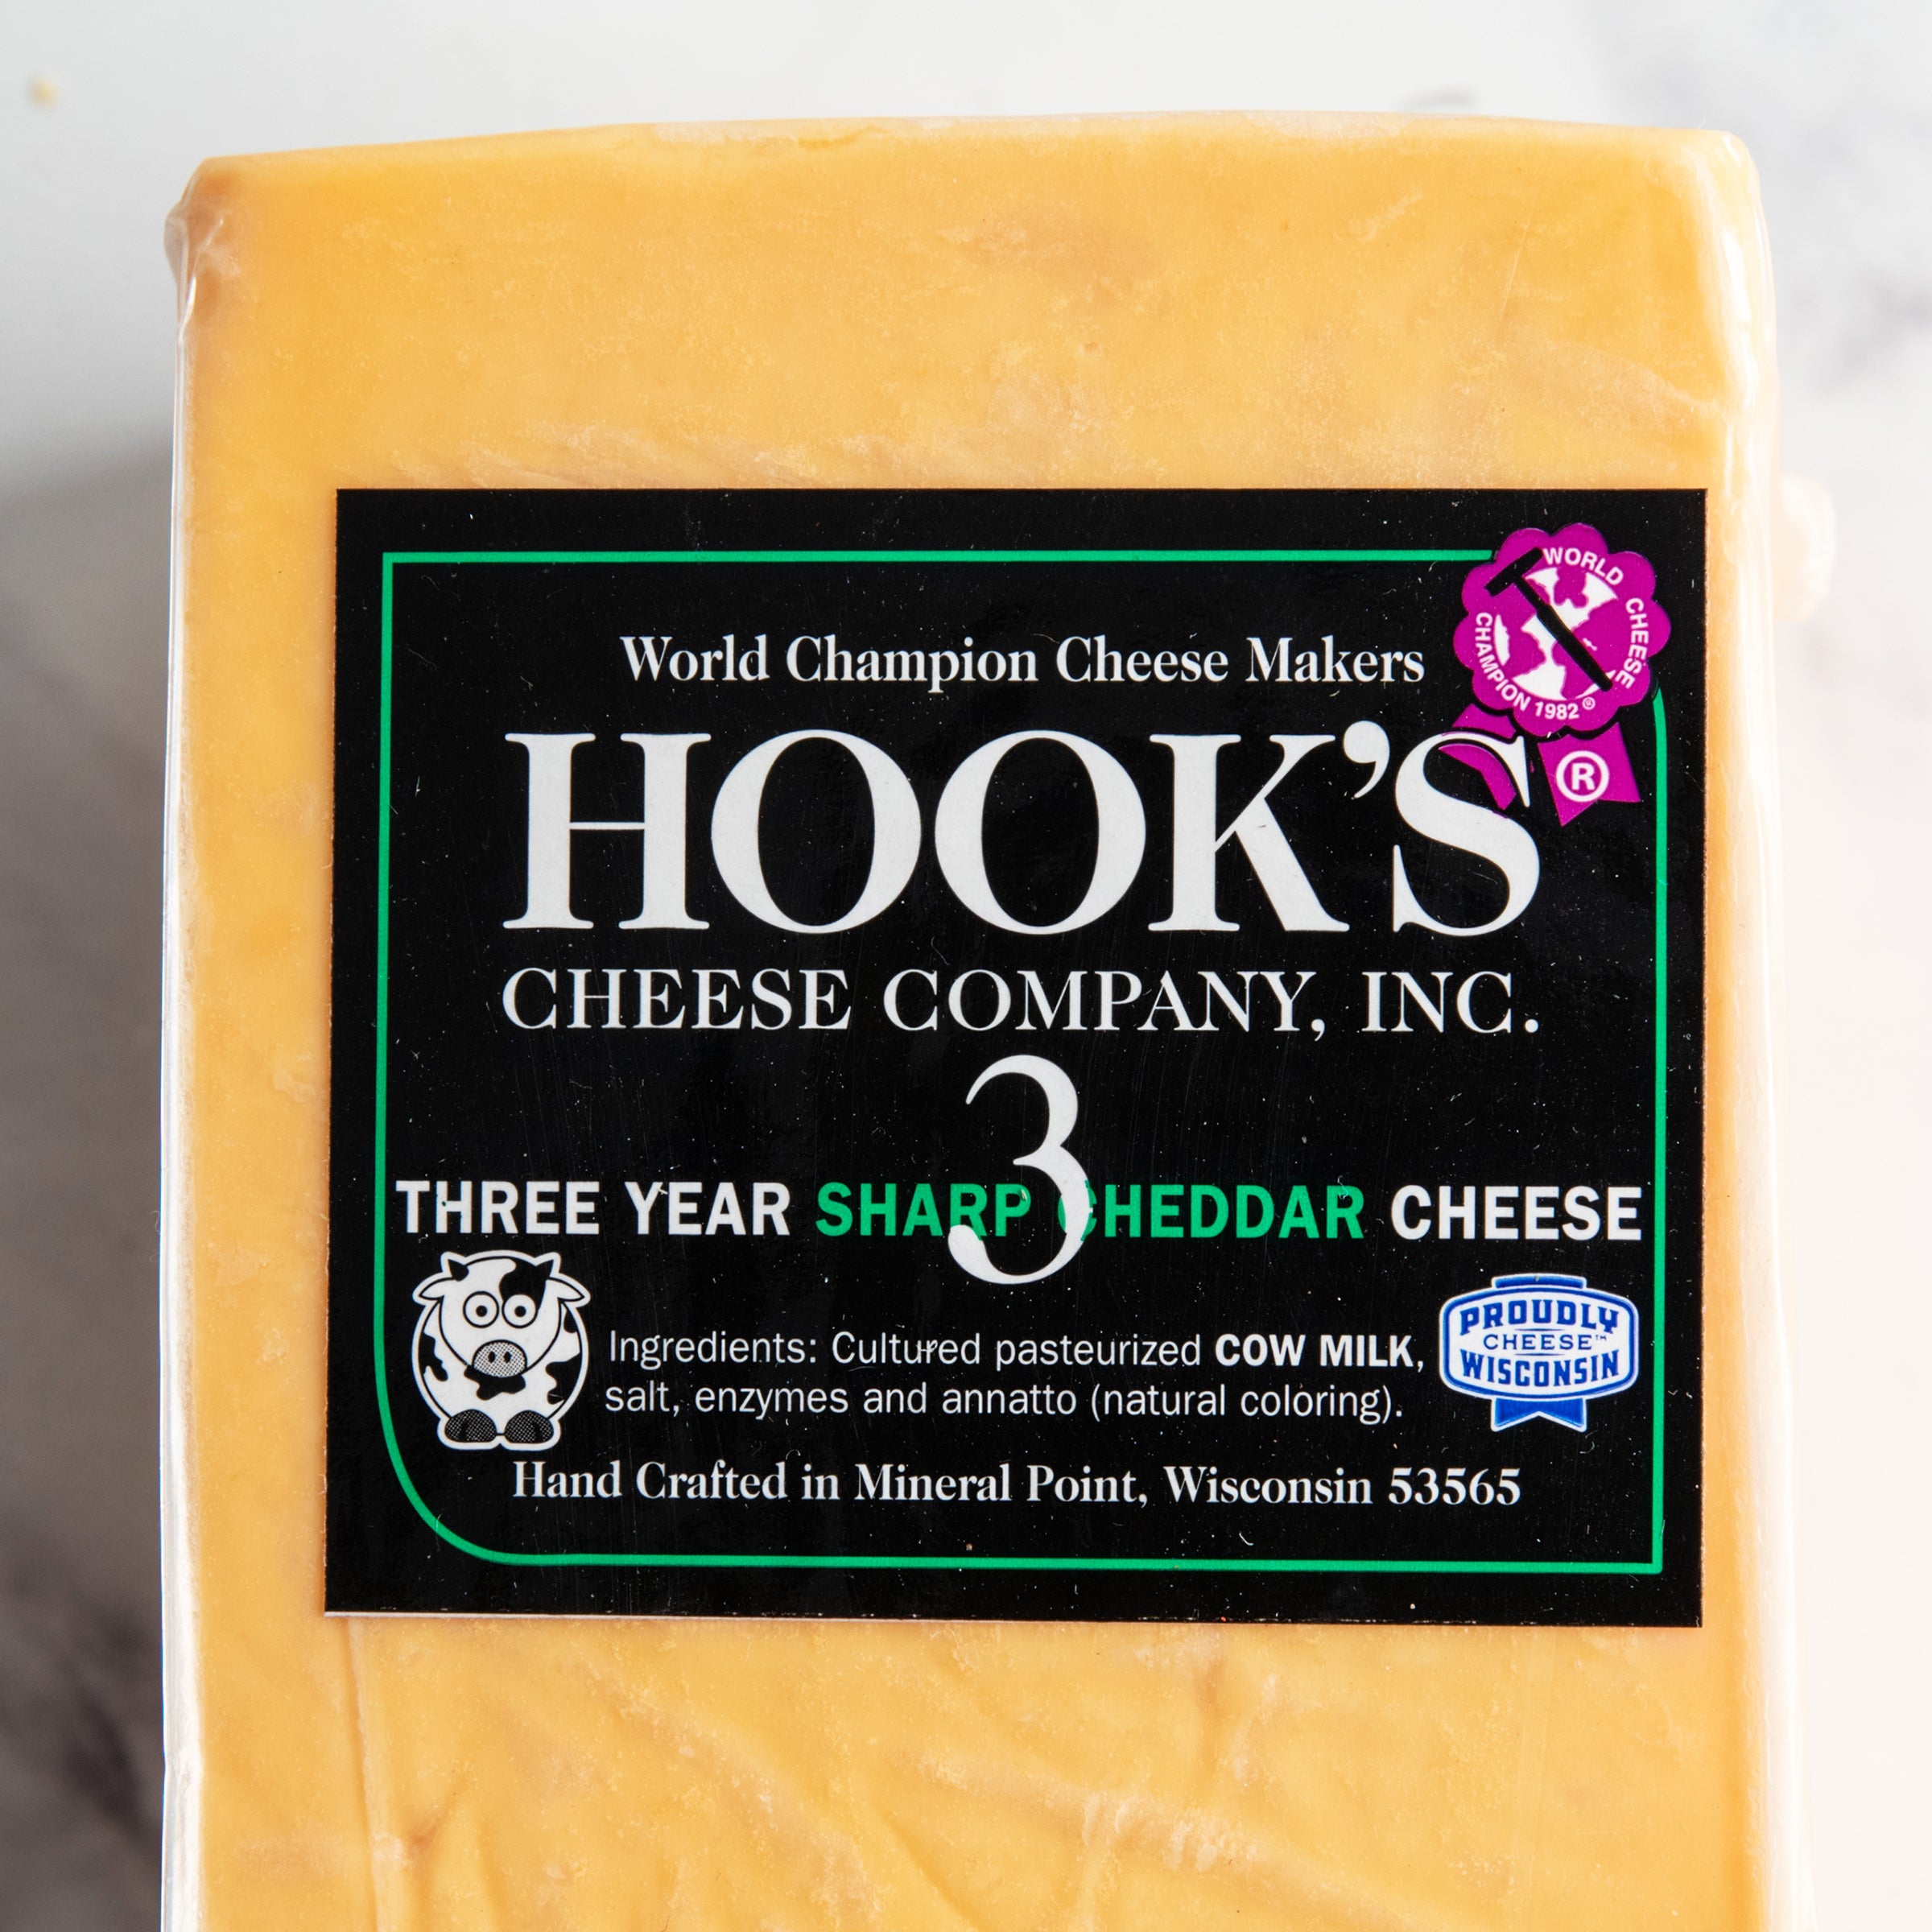 Hook's 3 Year Sharp Cheddar Cheese